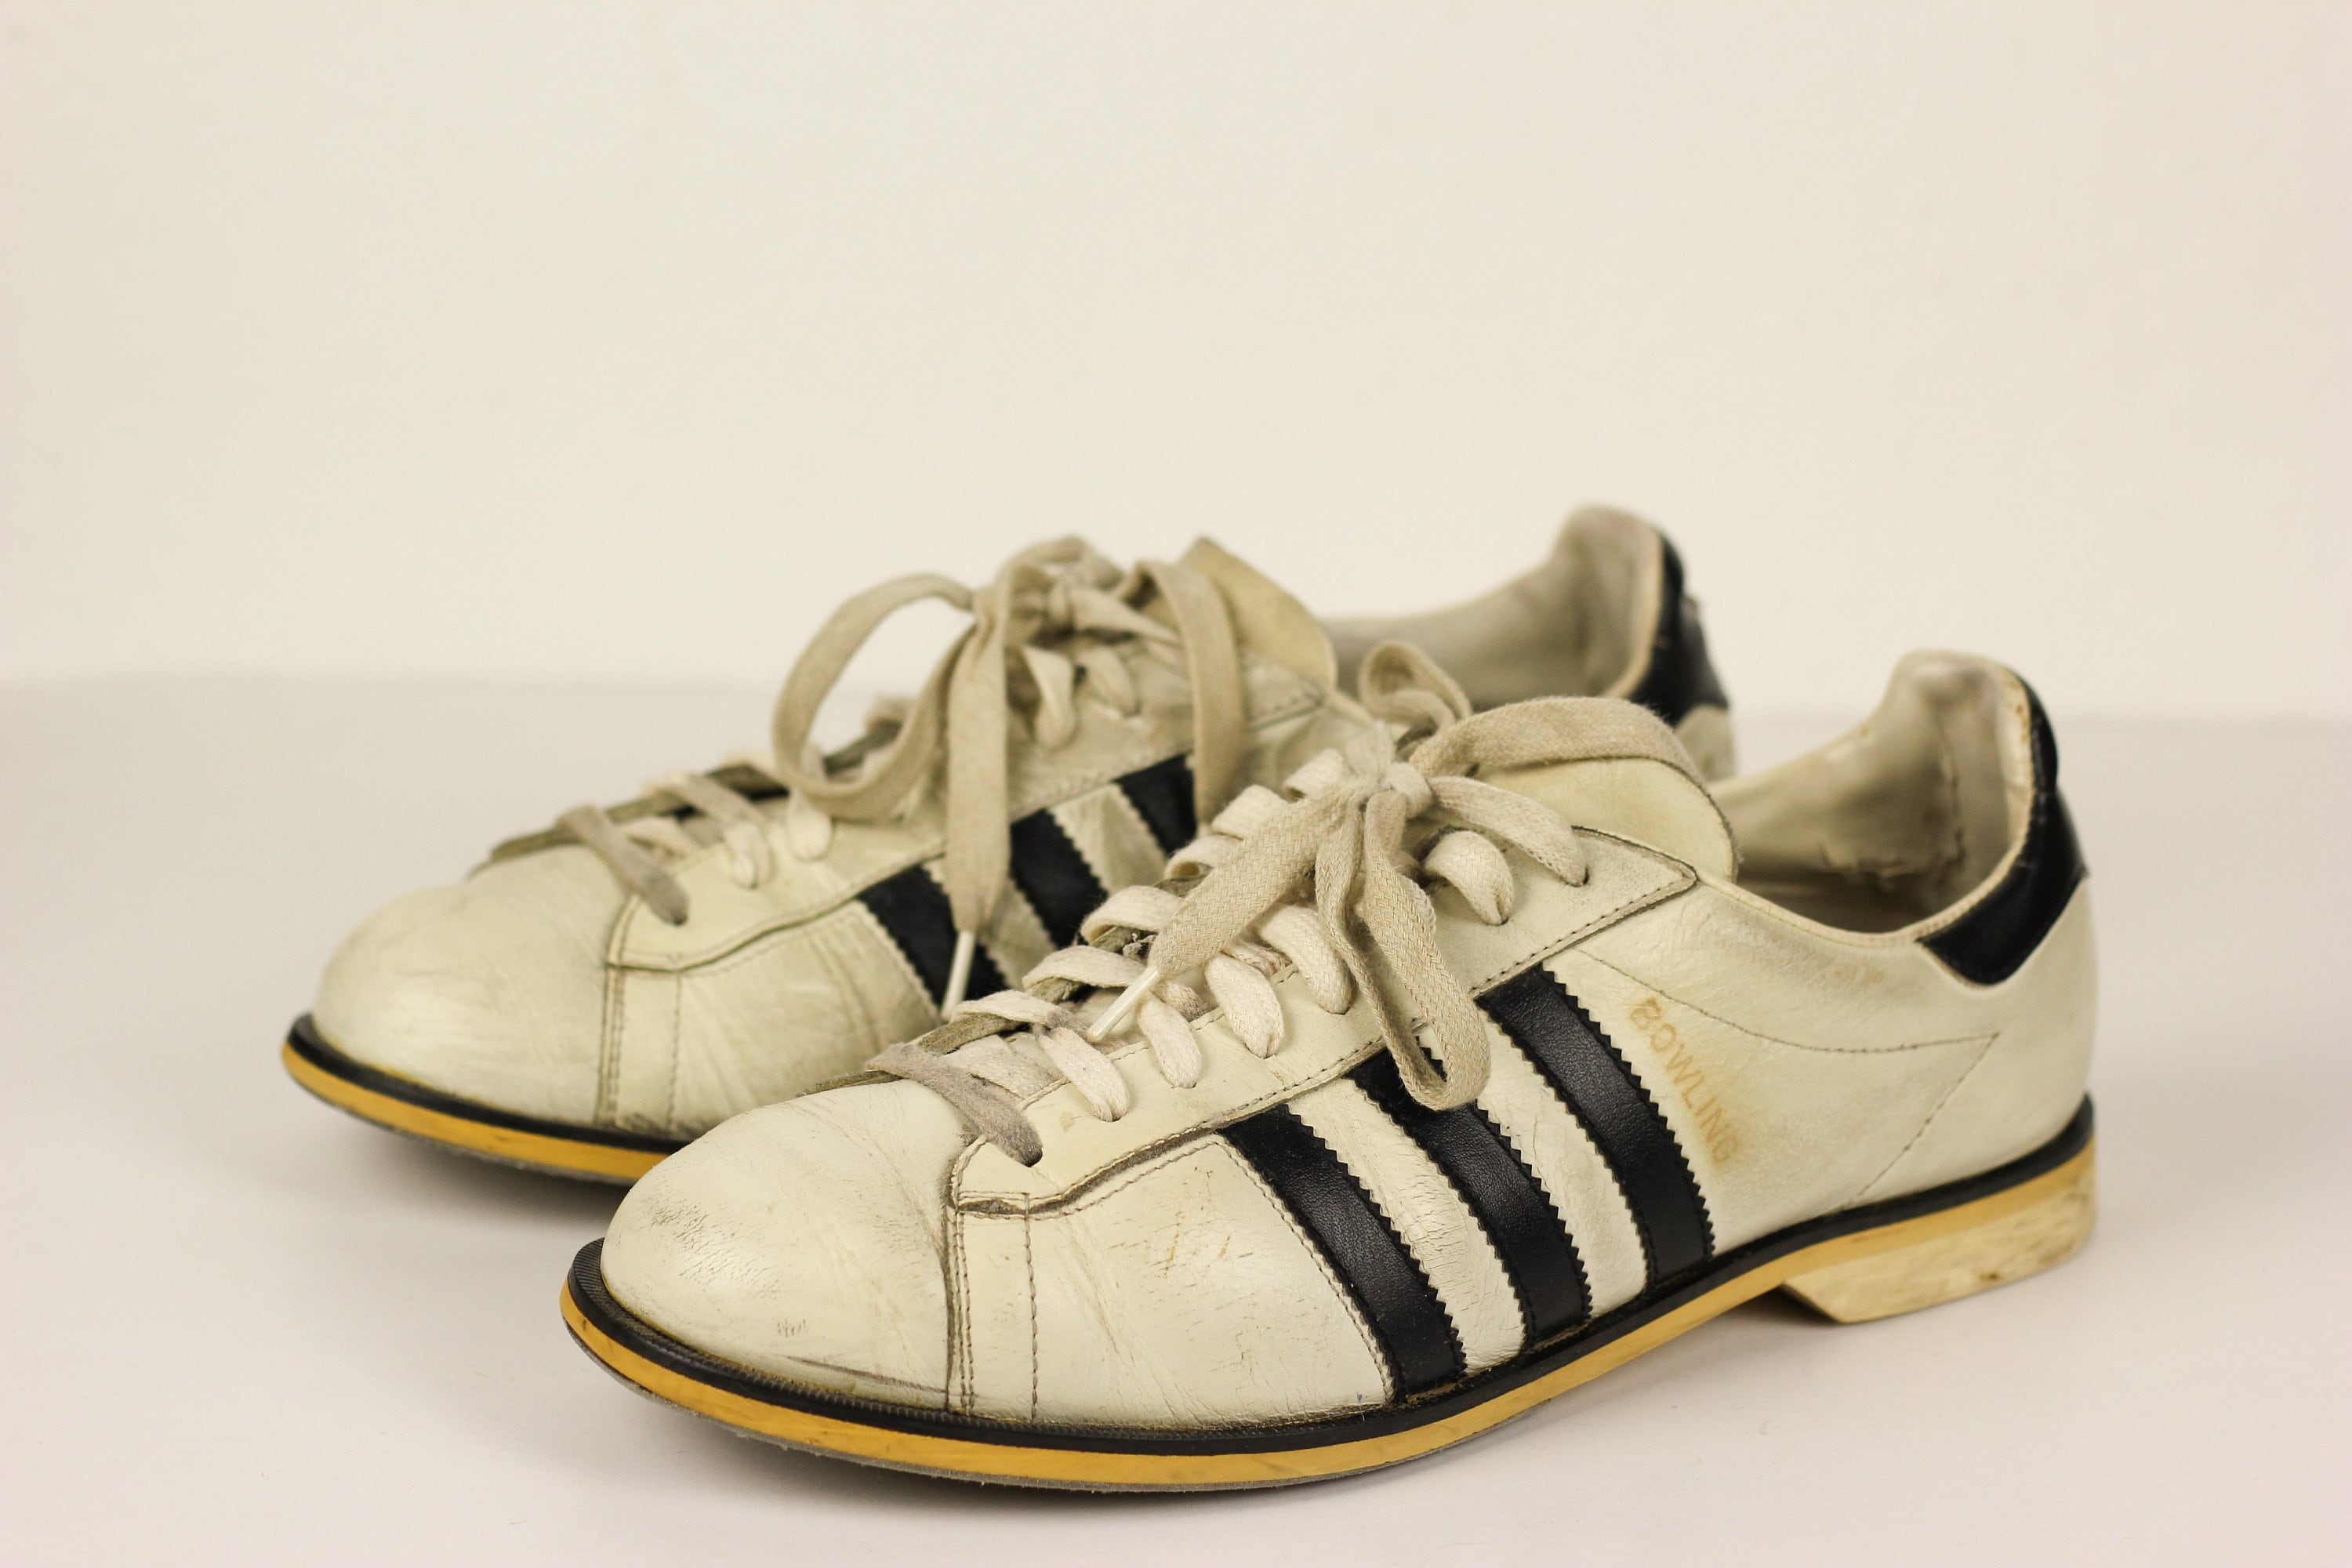 True Vintage Adidas Bowling Shoes Sneaker Trainers Gr 8 / 42 - Etsy Finland